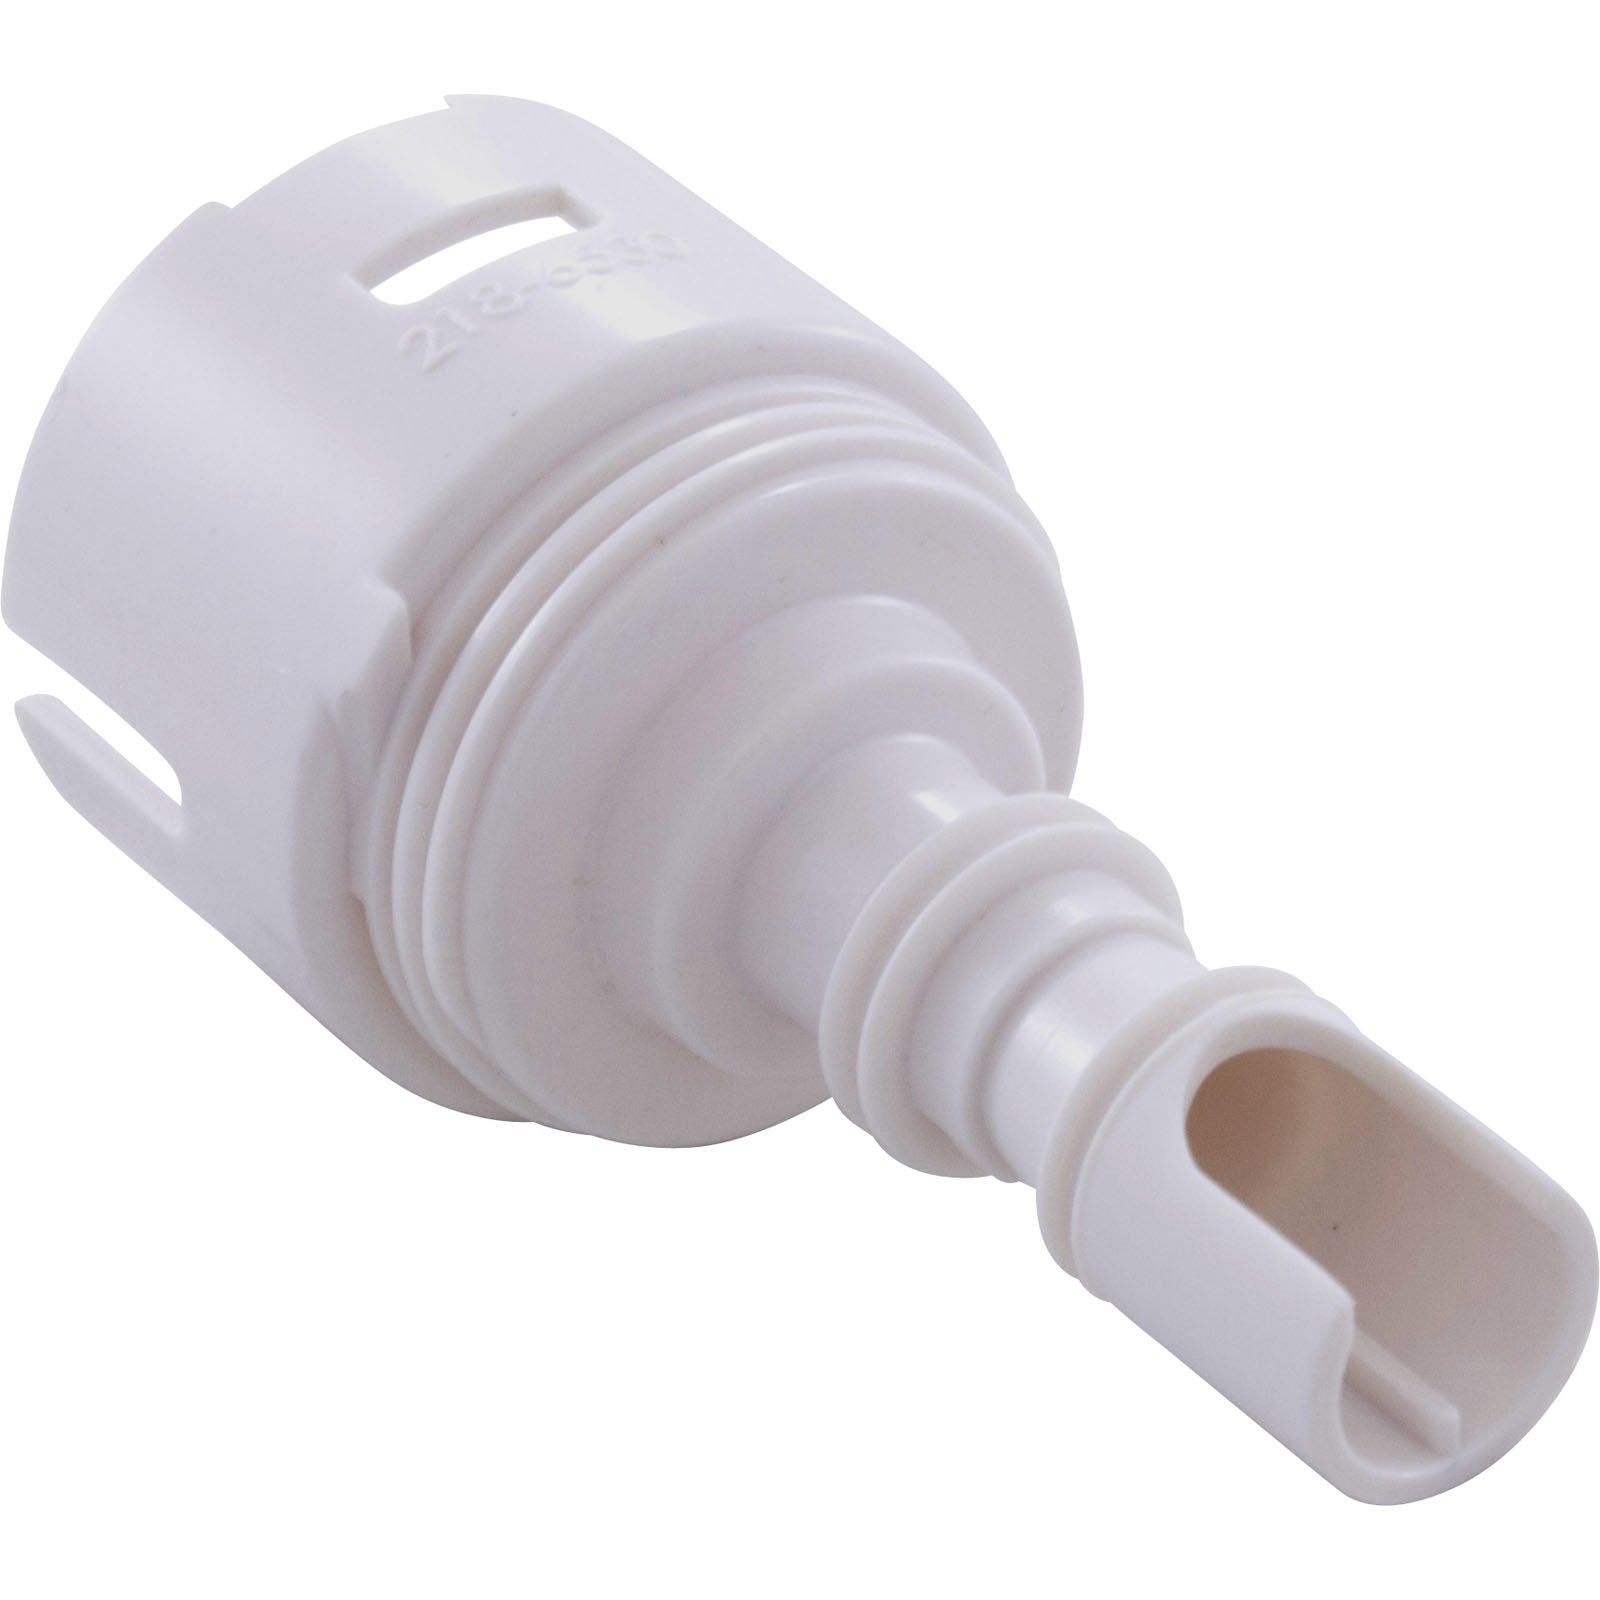 Waterway Mini Storm/Poly Storm Thread-In Jet Diffuser [White] (218-6530)